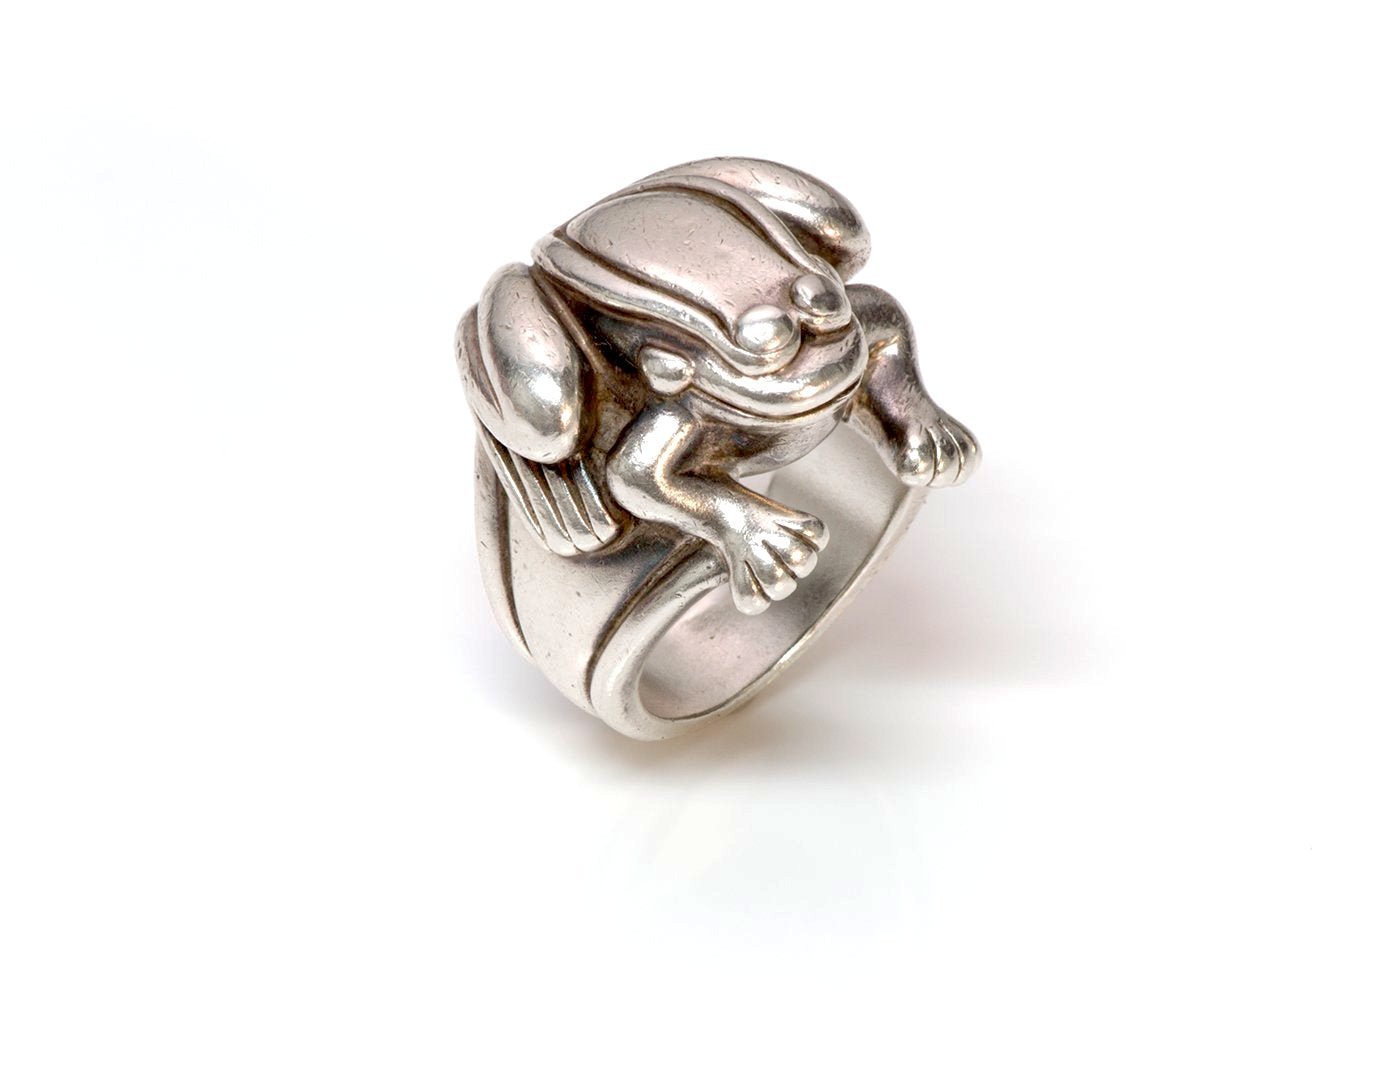 Barry Kieselstein-Cord Silver Frog Ring